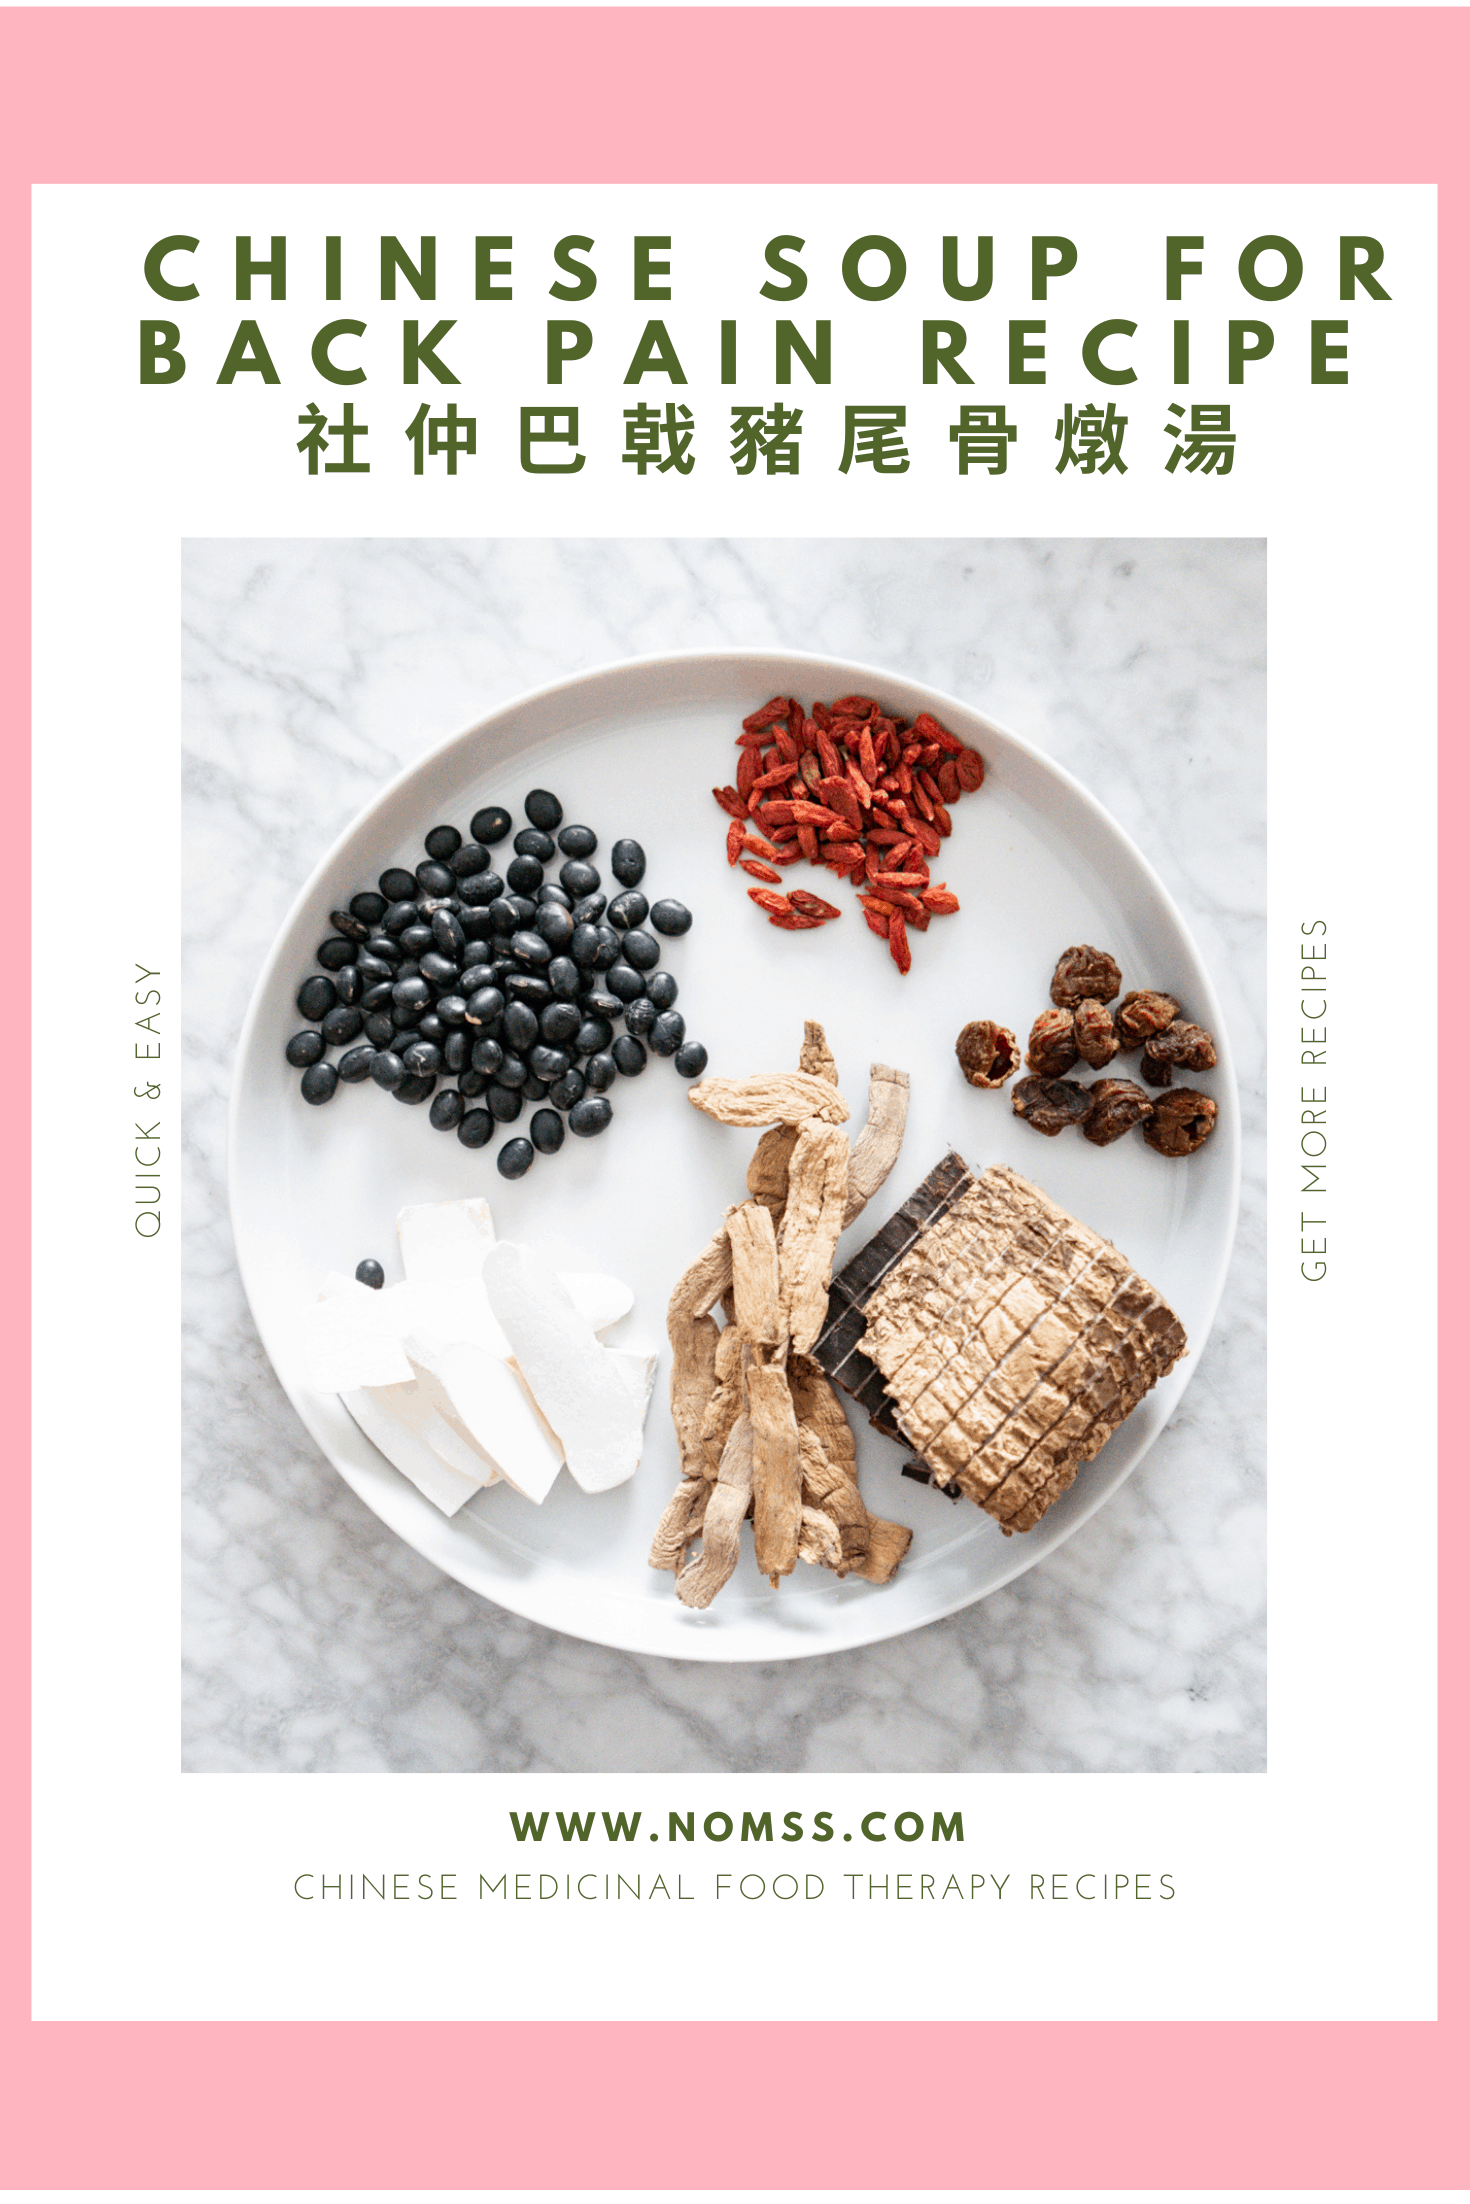 https://www.nomss.com/wp-content/uploads/2017/11/CHINESE-SOUP-FOR-BACK-PAIN-RECIPE.png